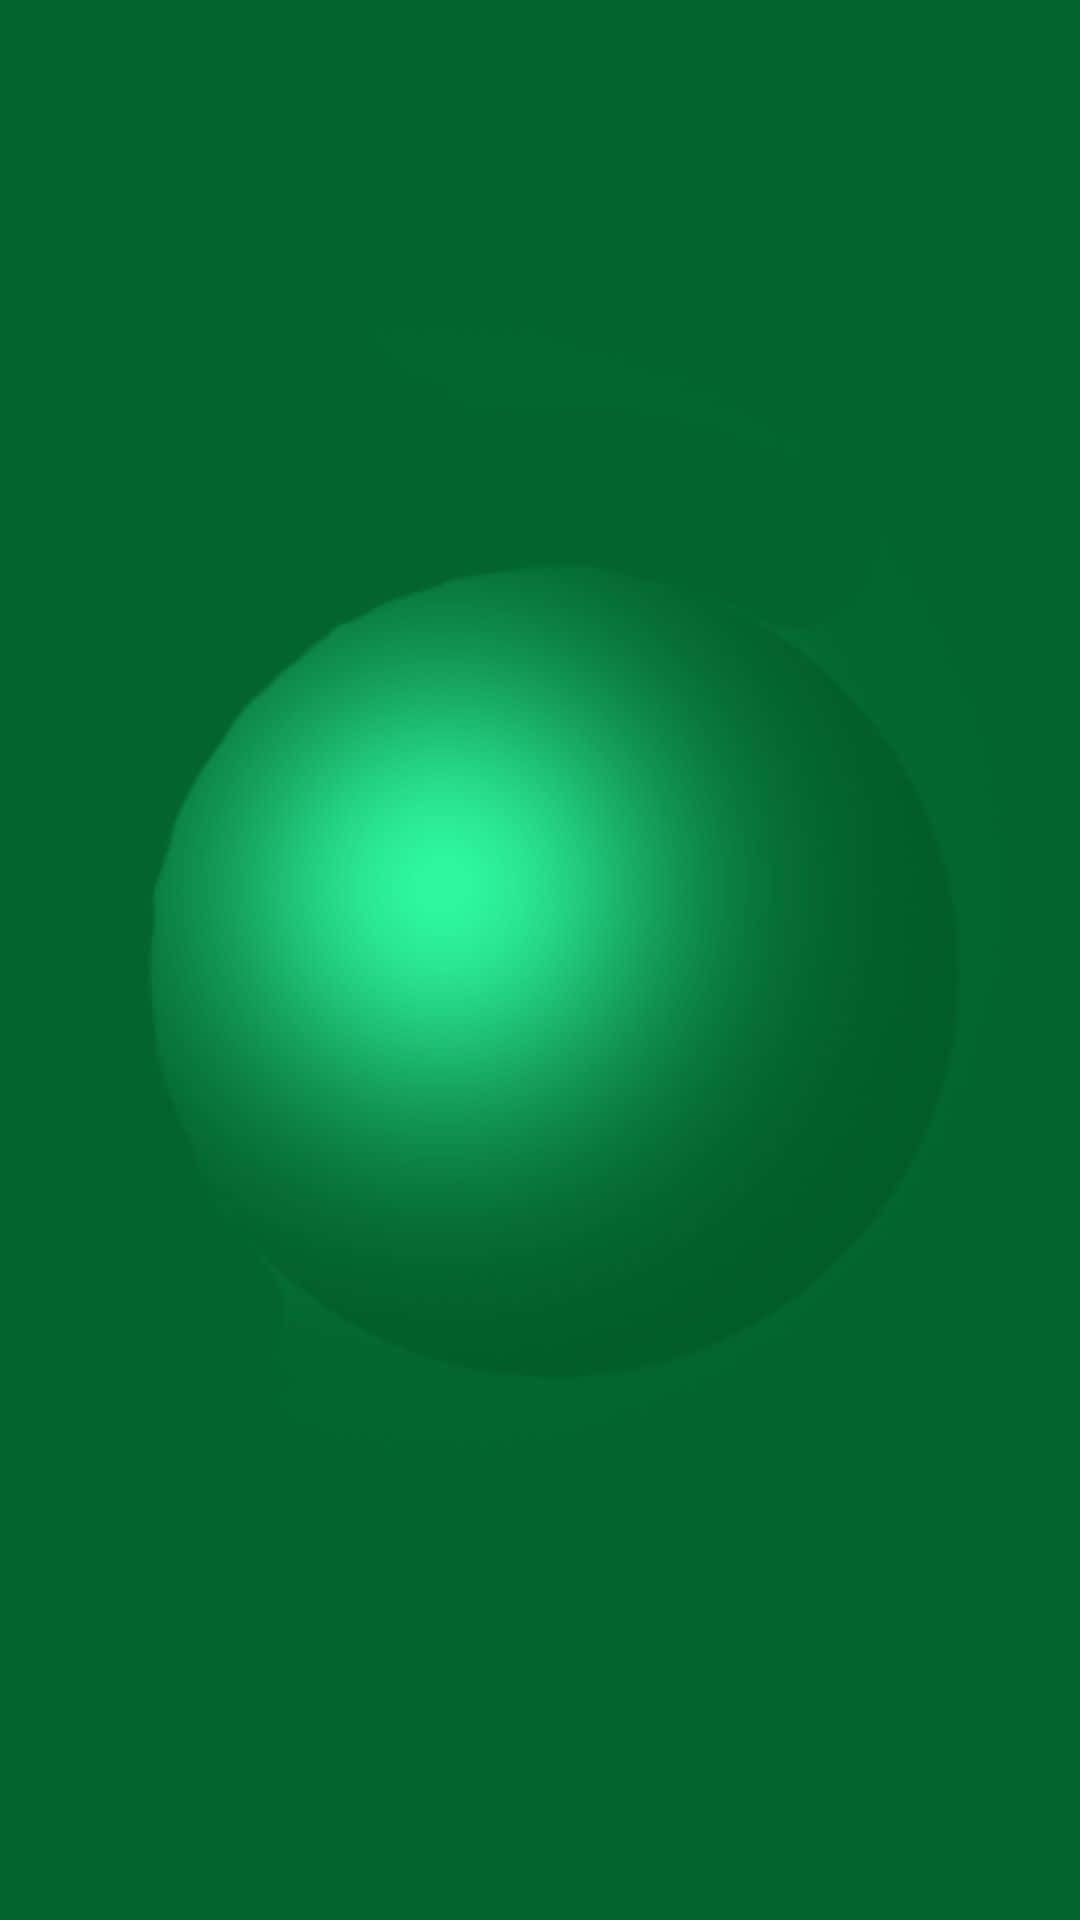 Bright and Vibrant Green Gradient Background